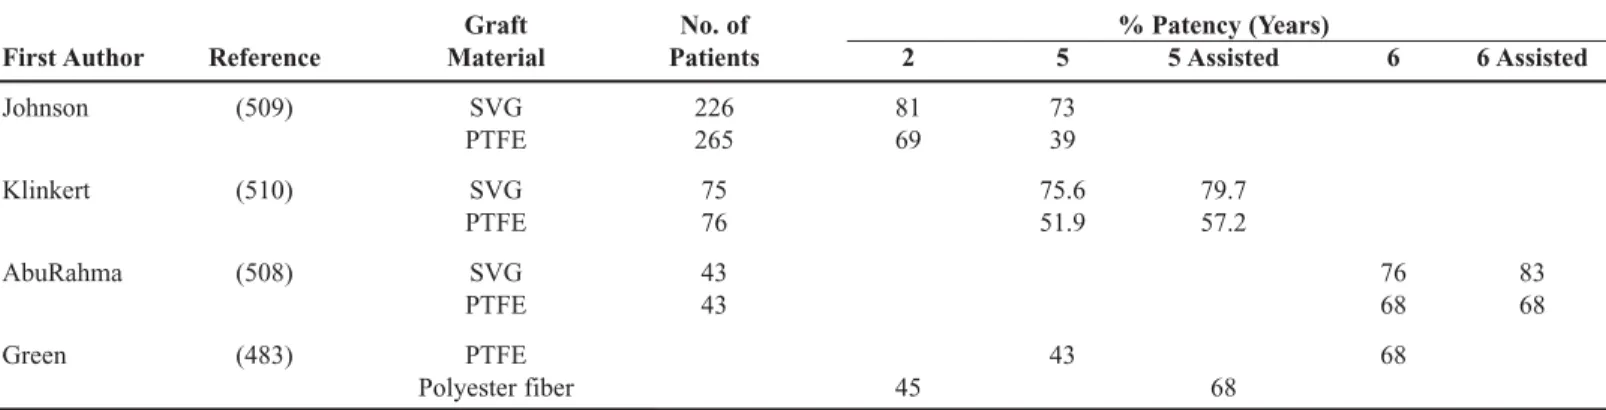 Table 25. Patency of Above-Knee Femoral Popliteal Bypass Grafts According to Prospective Randomized Trials